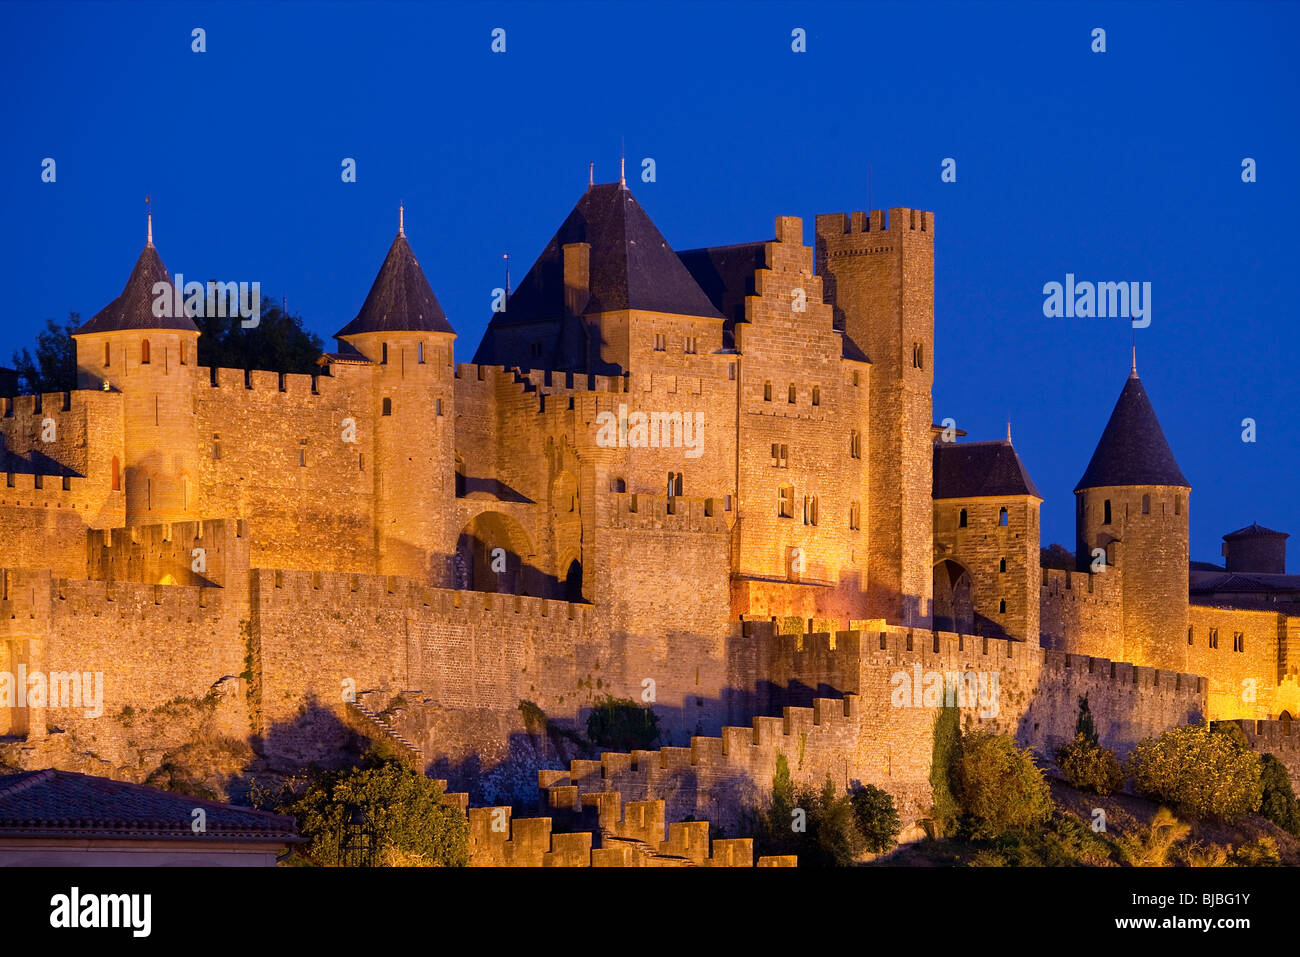 MEDIEVAL TOWN OF CARCASSONNE, FRANCE Stock Photo